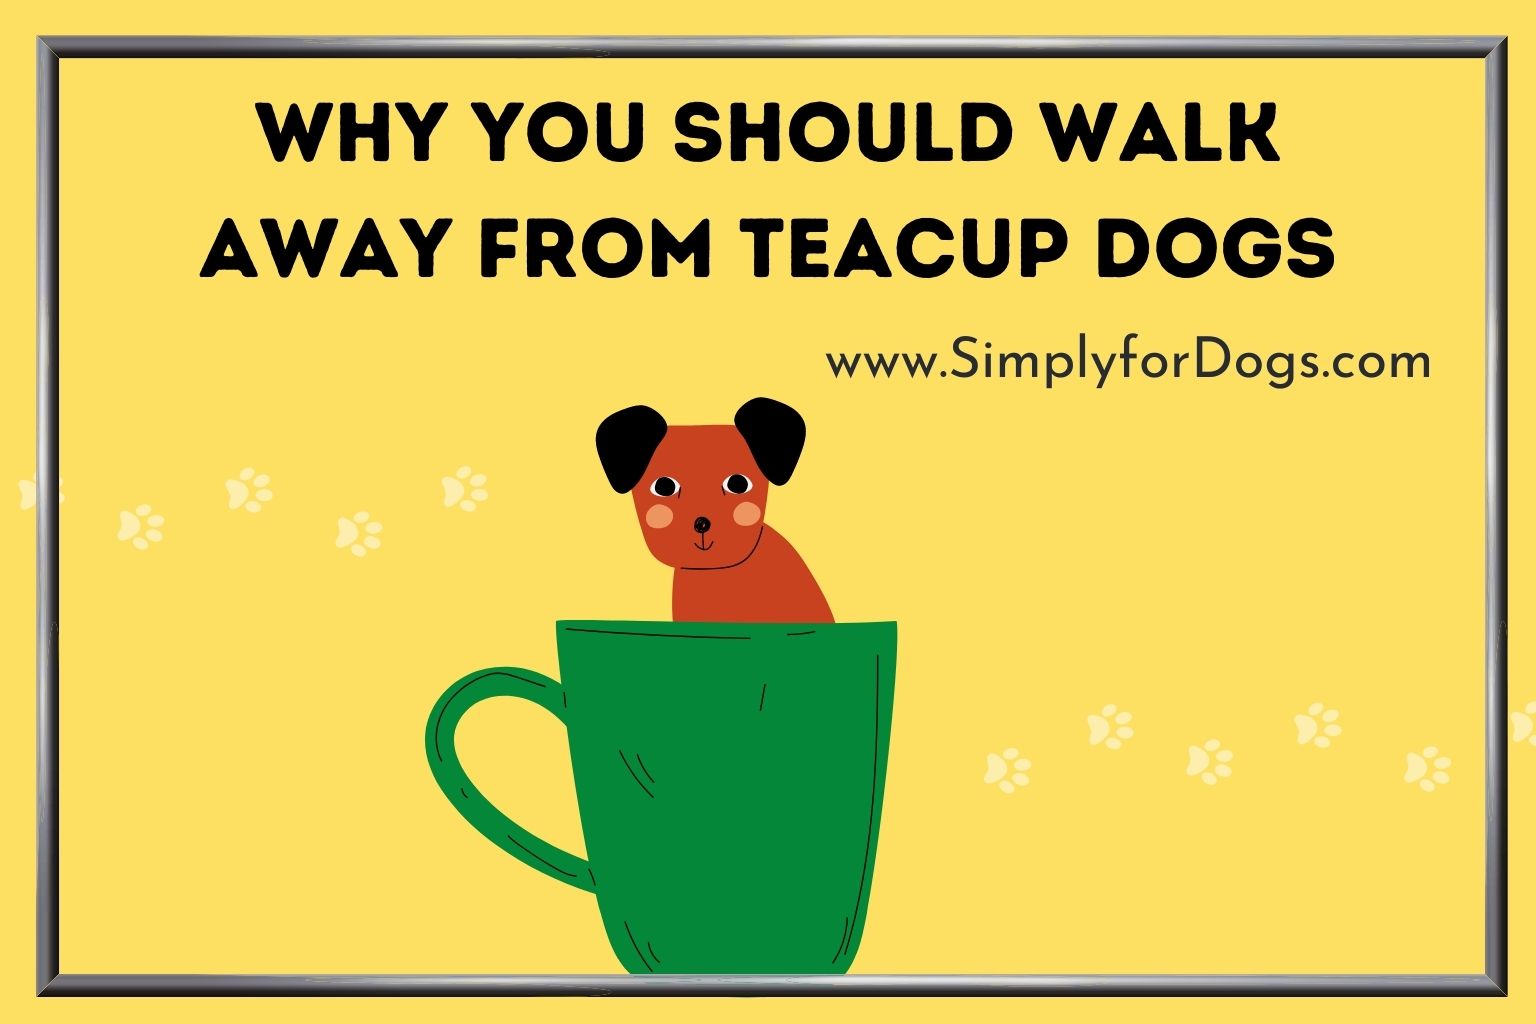 Why You Should Walk Away From Teacup Dogs